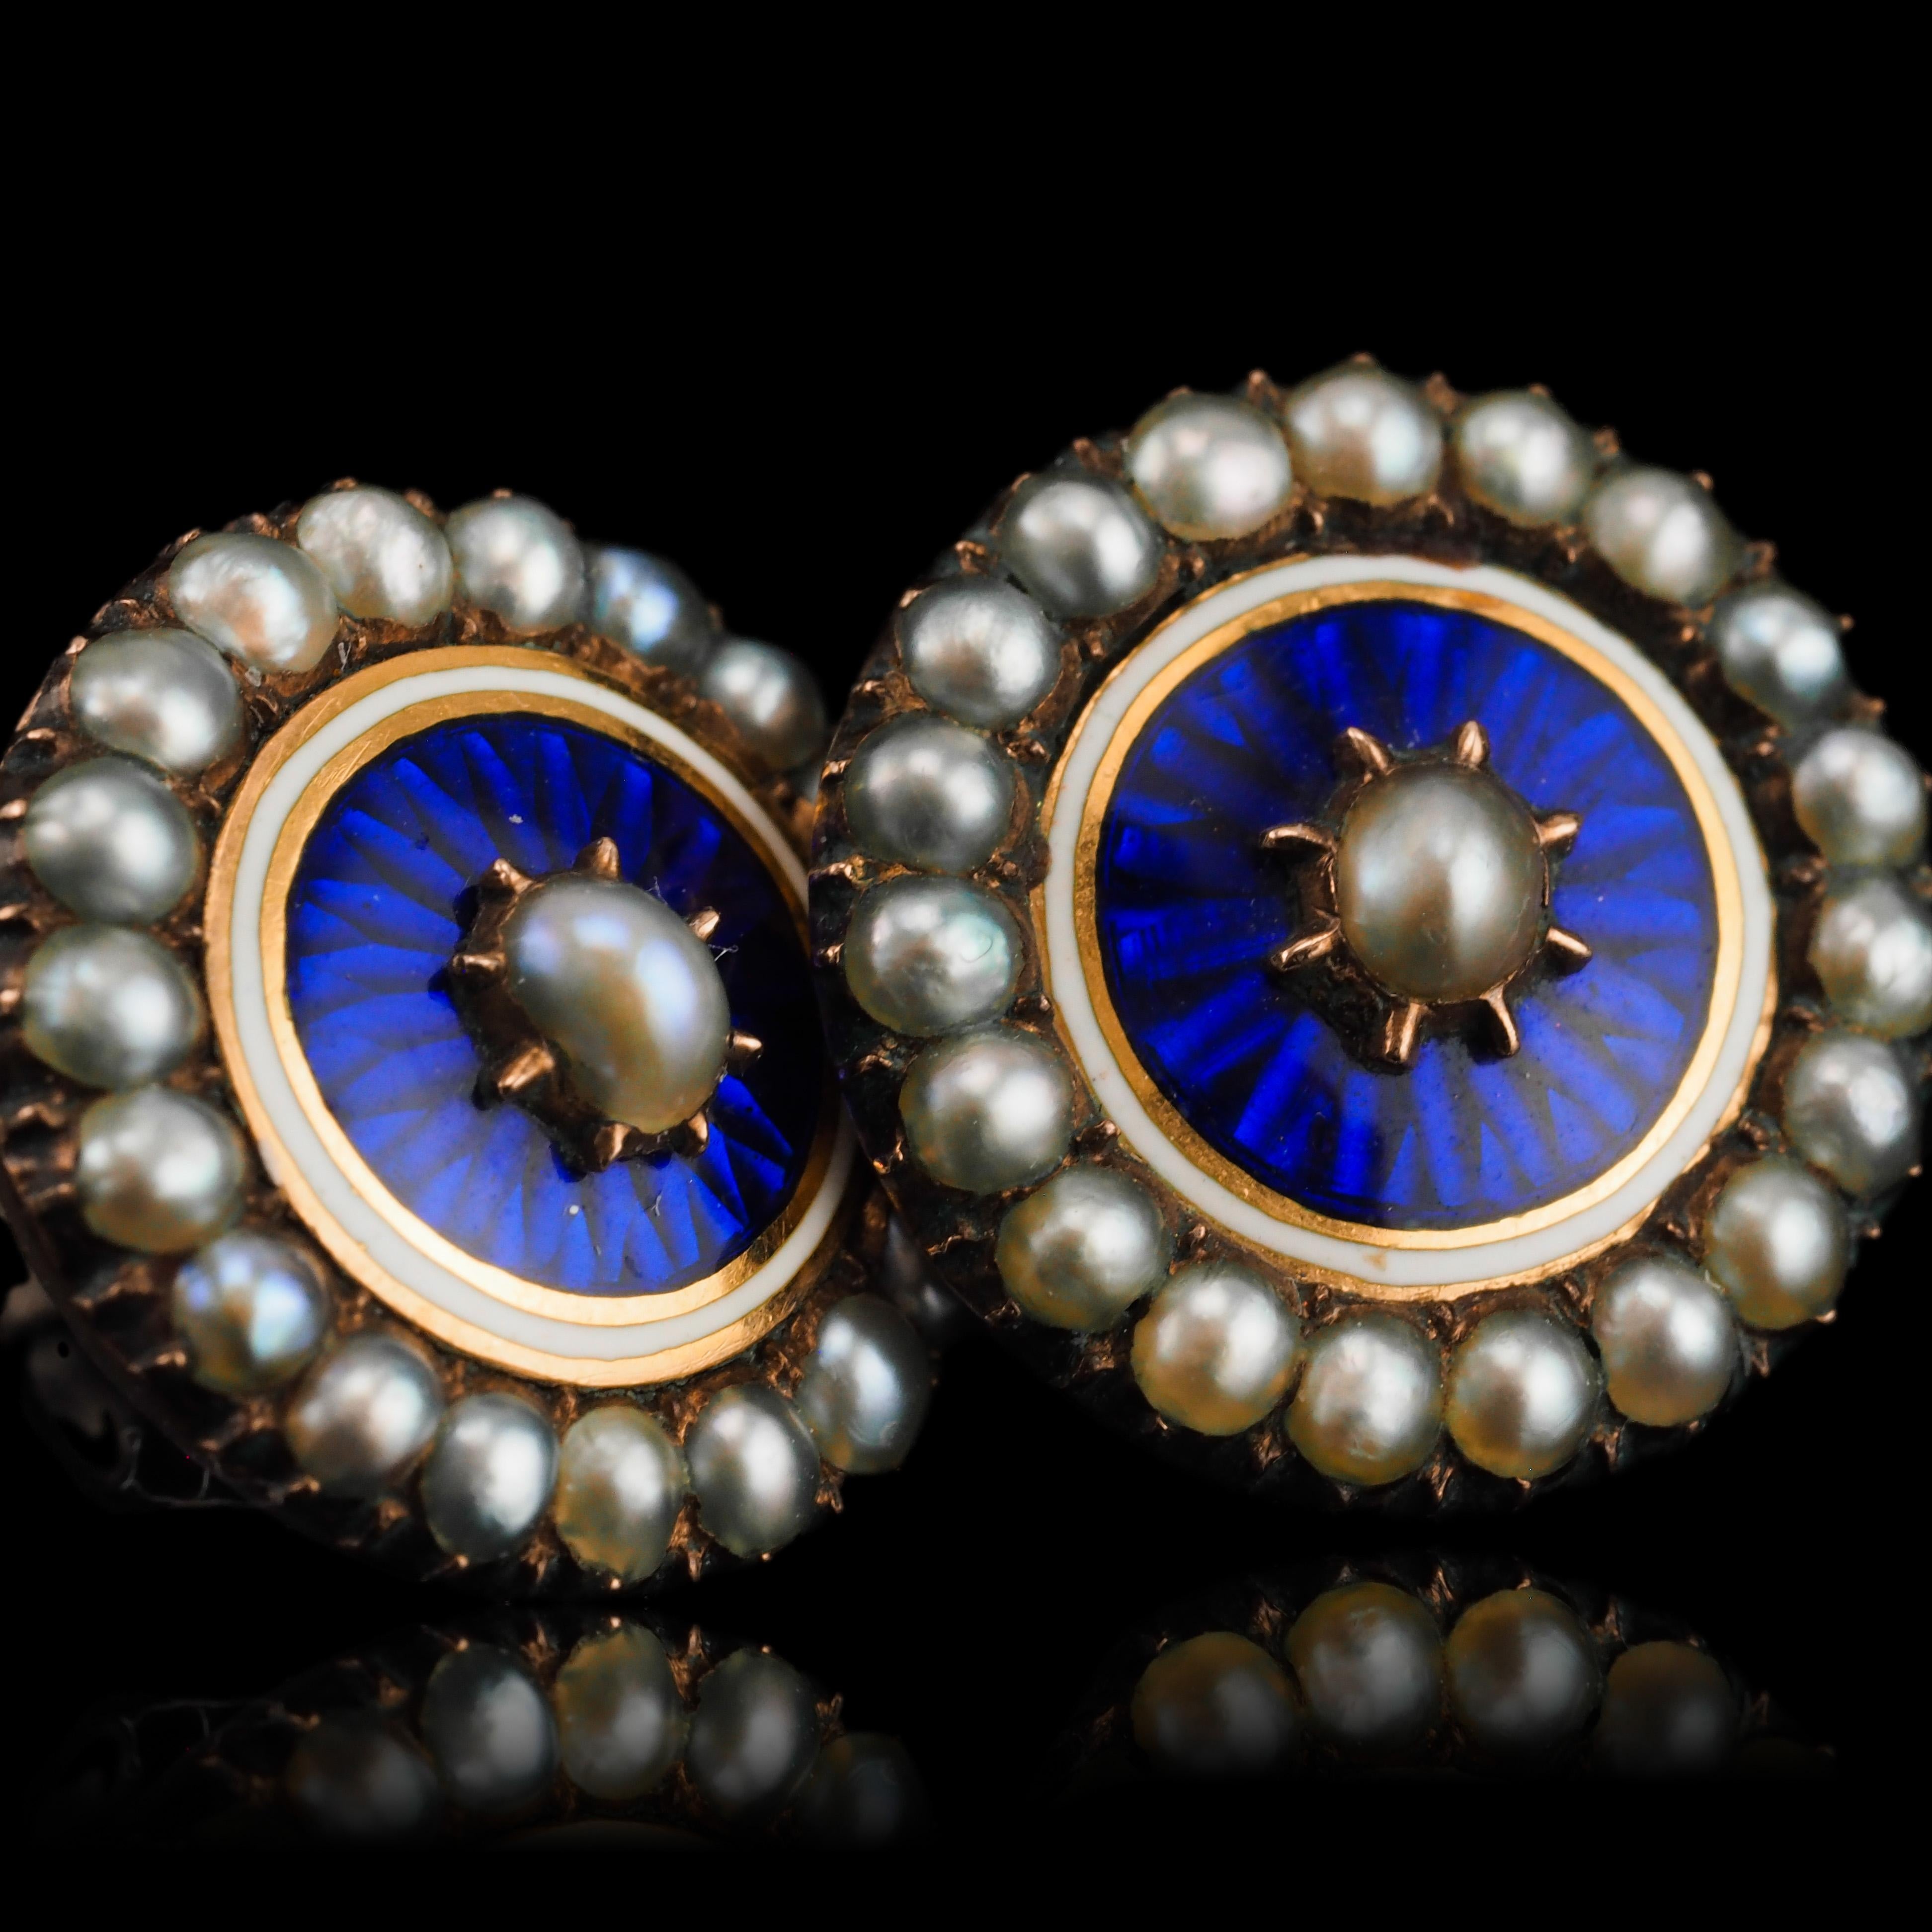 Antique Georgian Gold Earrings with Blue Enamel Guilloche Pearl Cluster c.1800 For Sale 3